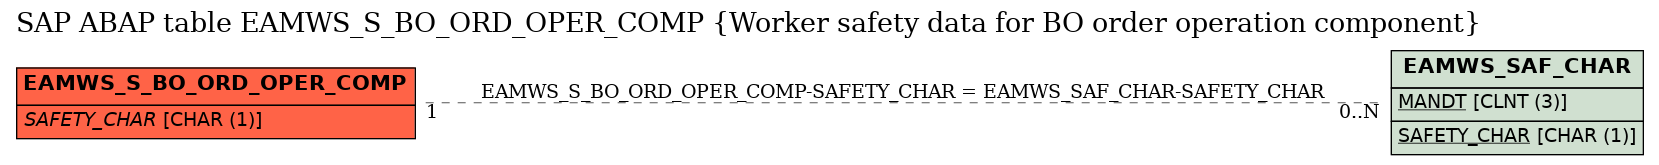 E-R Diagram for table EAMWS_S_BO_ORD_OPER_COMP (Worker safety data for BO order operation component)